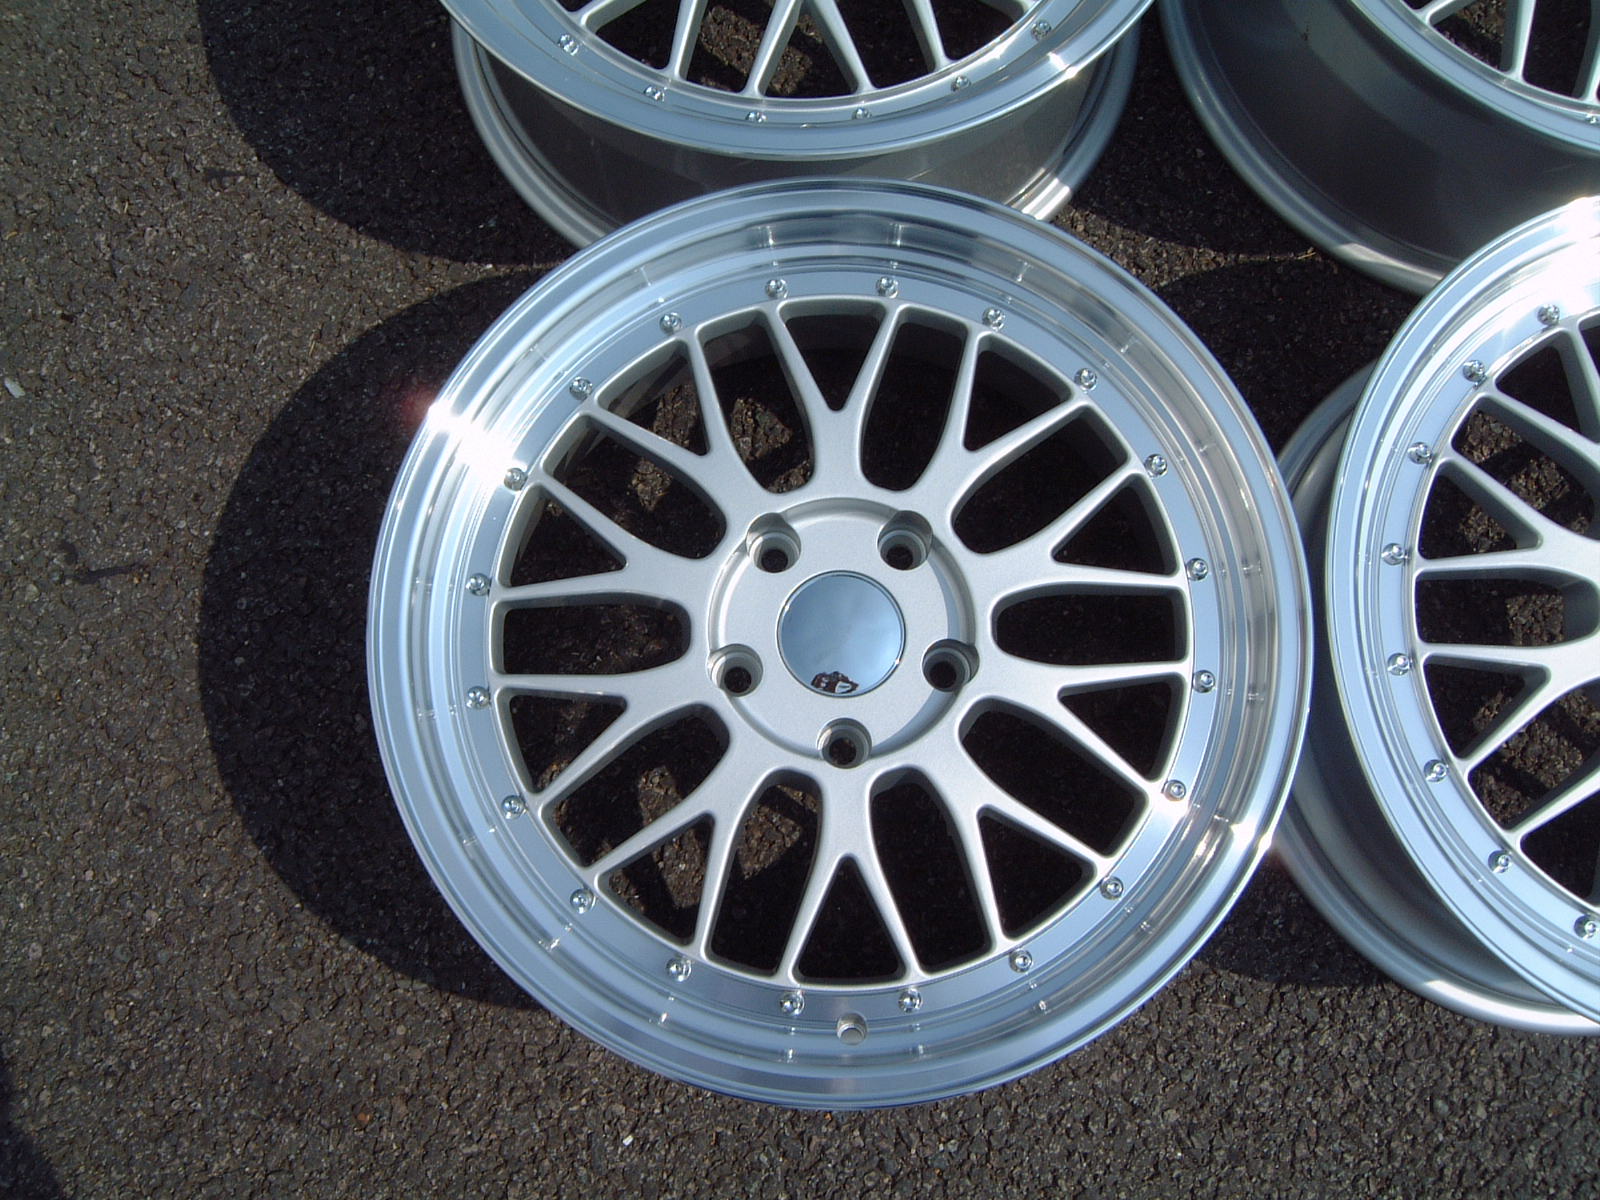 NEW 18  LM CROSS SPOKE ALLOY WHEELS IN SILVER WITH BIG STEPPED POLISHED DEEP DISH AND 9 5  REAR S